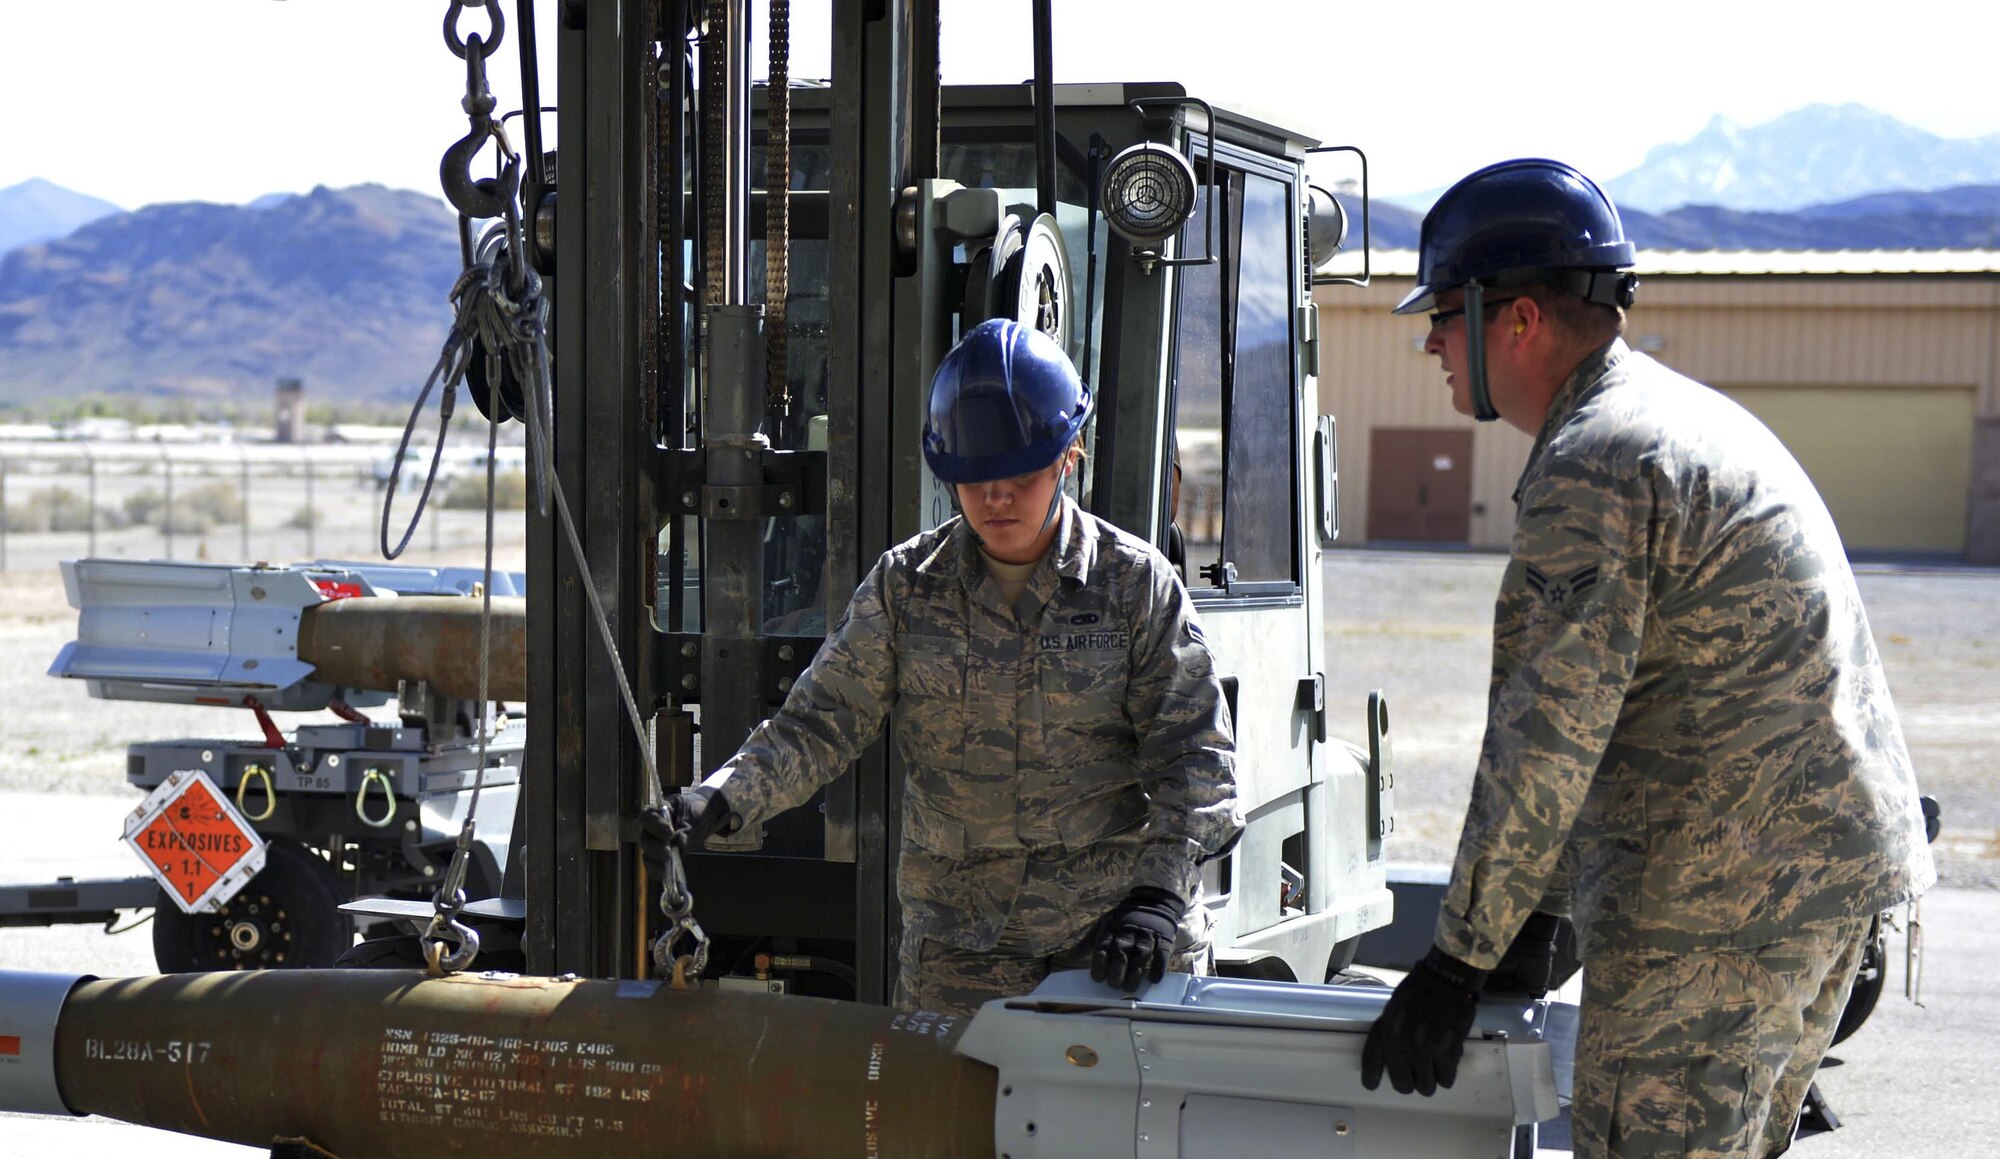 Airman 1st Class Karen and Airman 1st Class Jacob, both Maintenance Squadron munitions flight crew members, participate in a munitions movement March 1, 2016 at Creech Air Force Base, Nevada. Karen and Jacob work in the support section of conventional munitions maintenance, which includes the line delivery program and equipment. (U.S. Air Force photo by Airman 1st Class Kristan Campbell/Released)